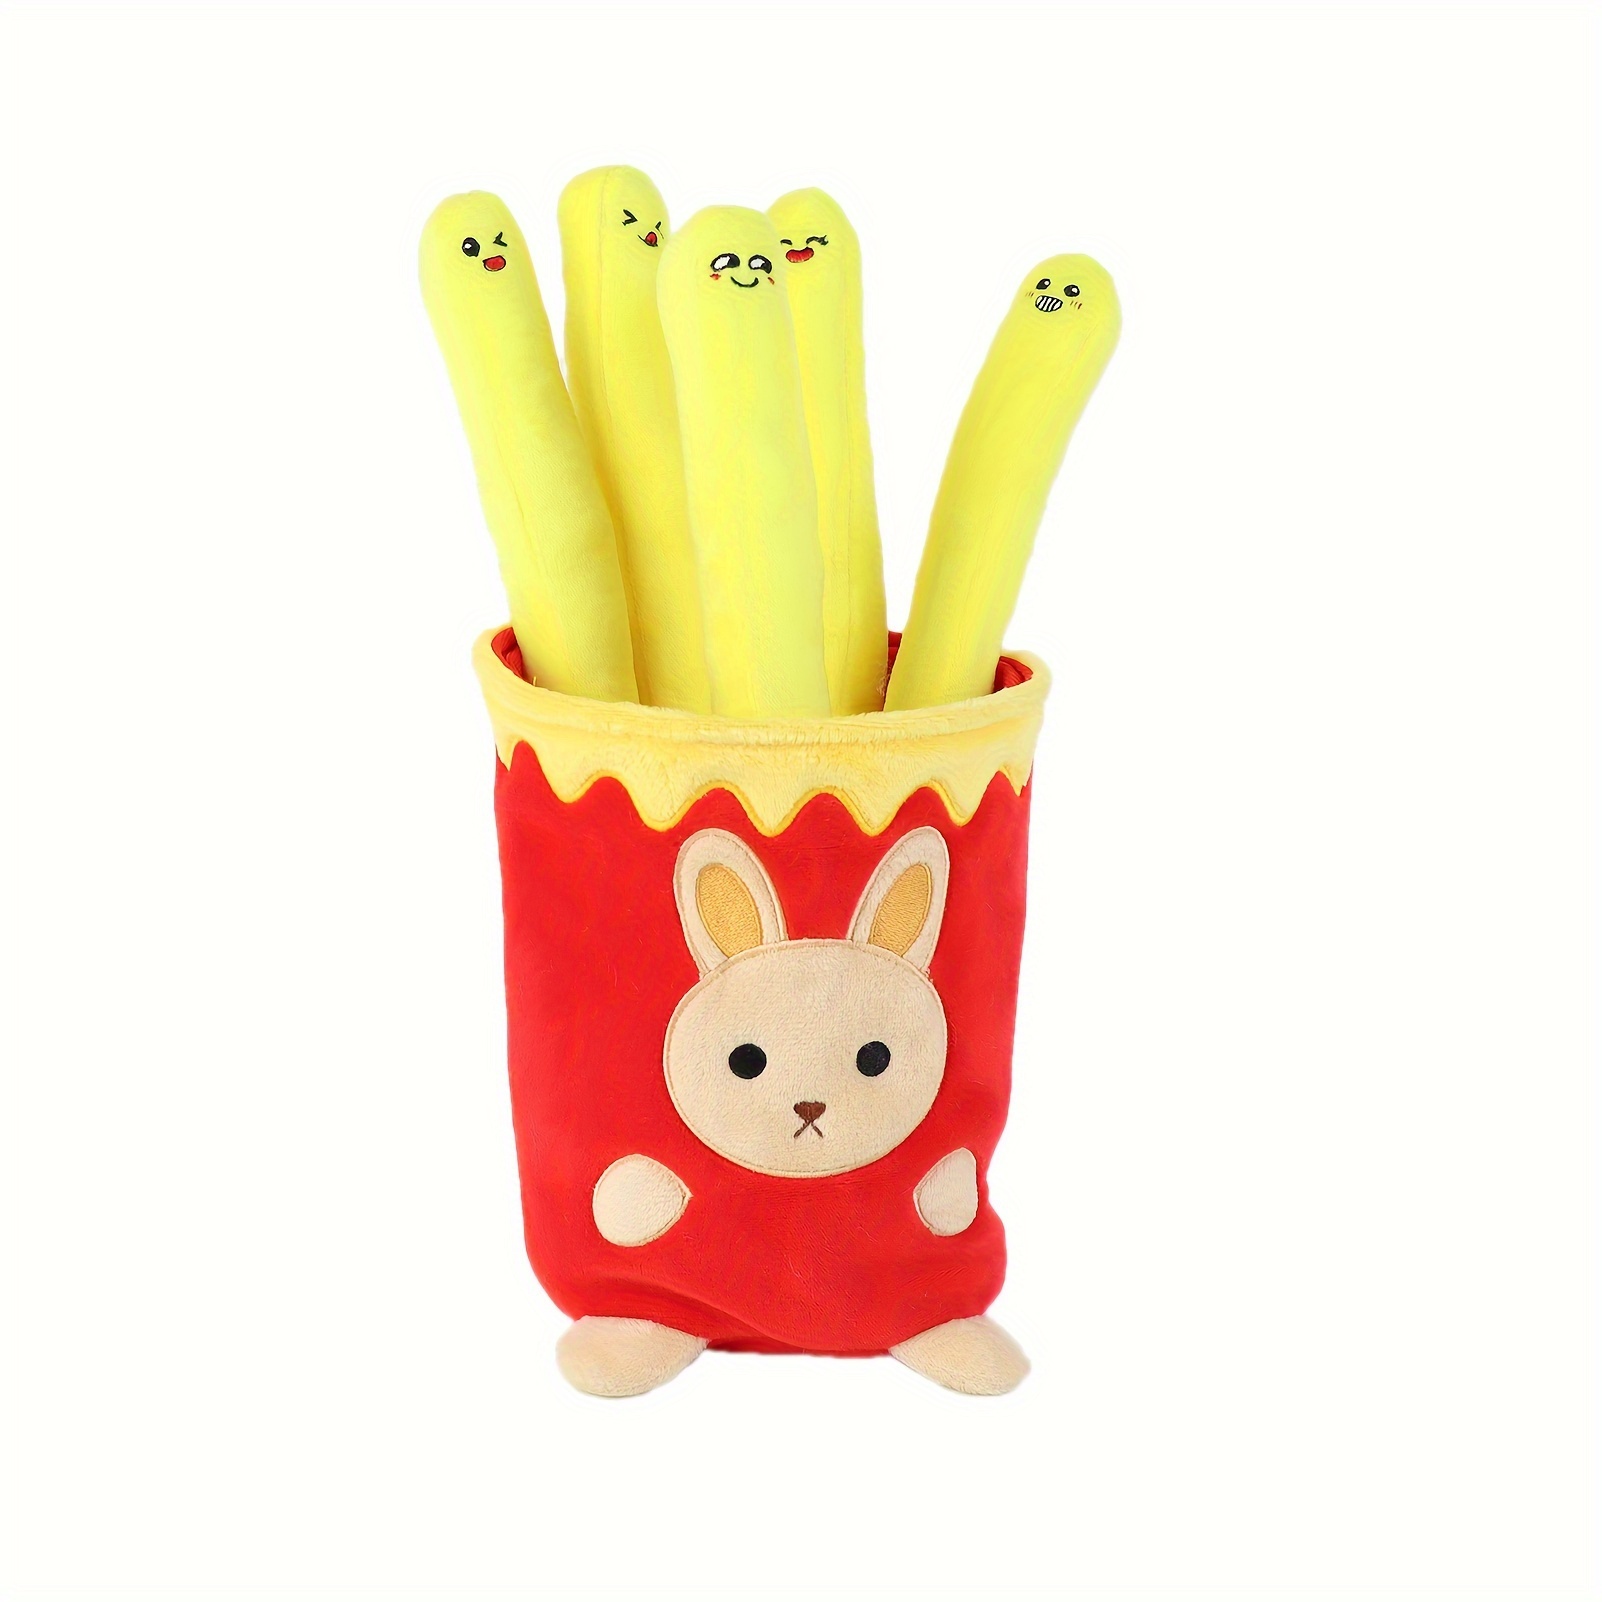 1pc 30cm/11.81in Emotional Support Smile French Fries Plush Stuffed Toy,  Room Decorative Plush Sofa Pillow Car Accessory, Children's Pretend Play  Accessory